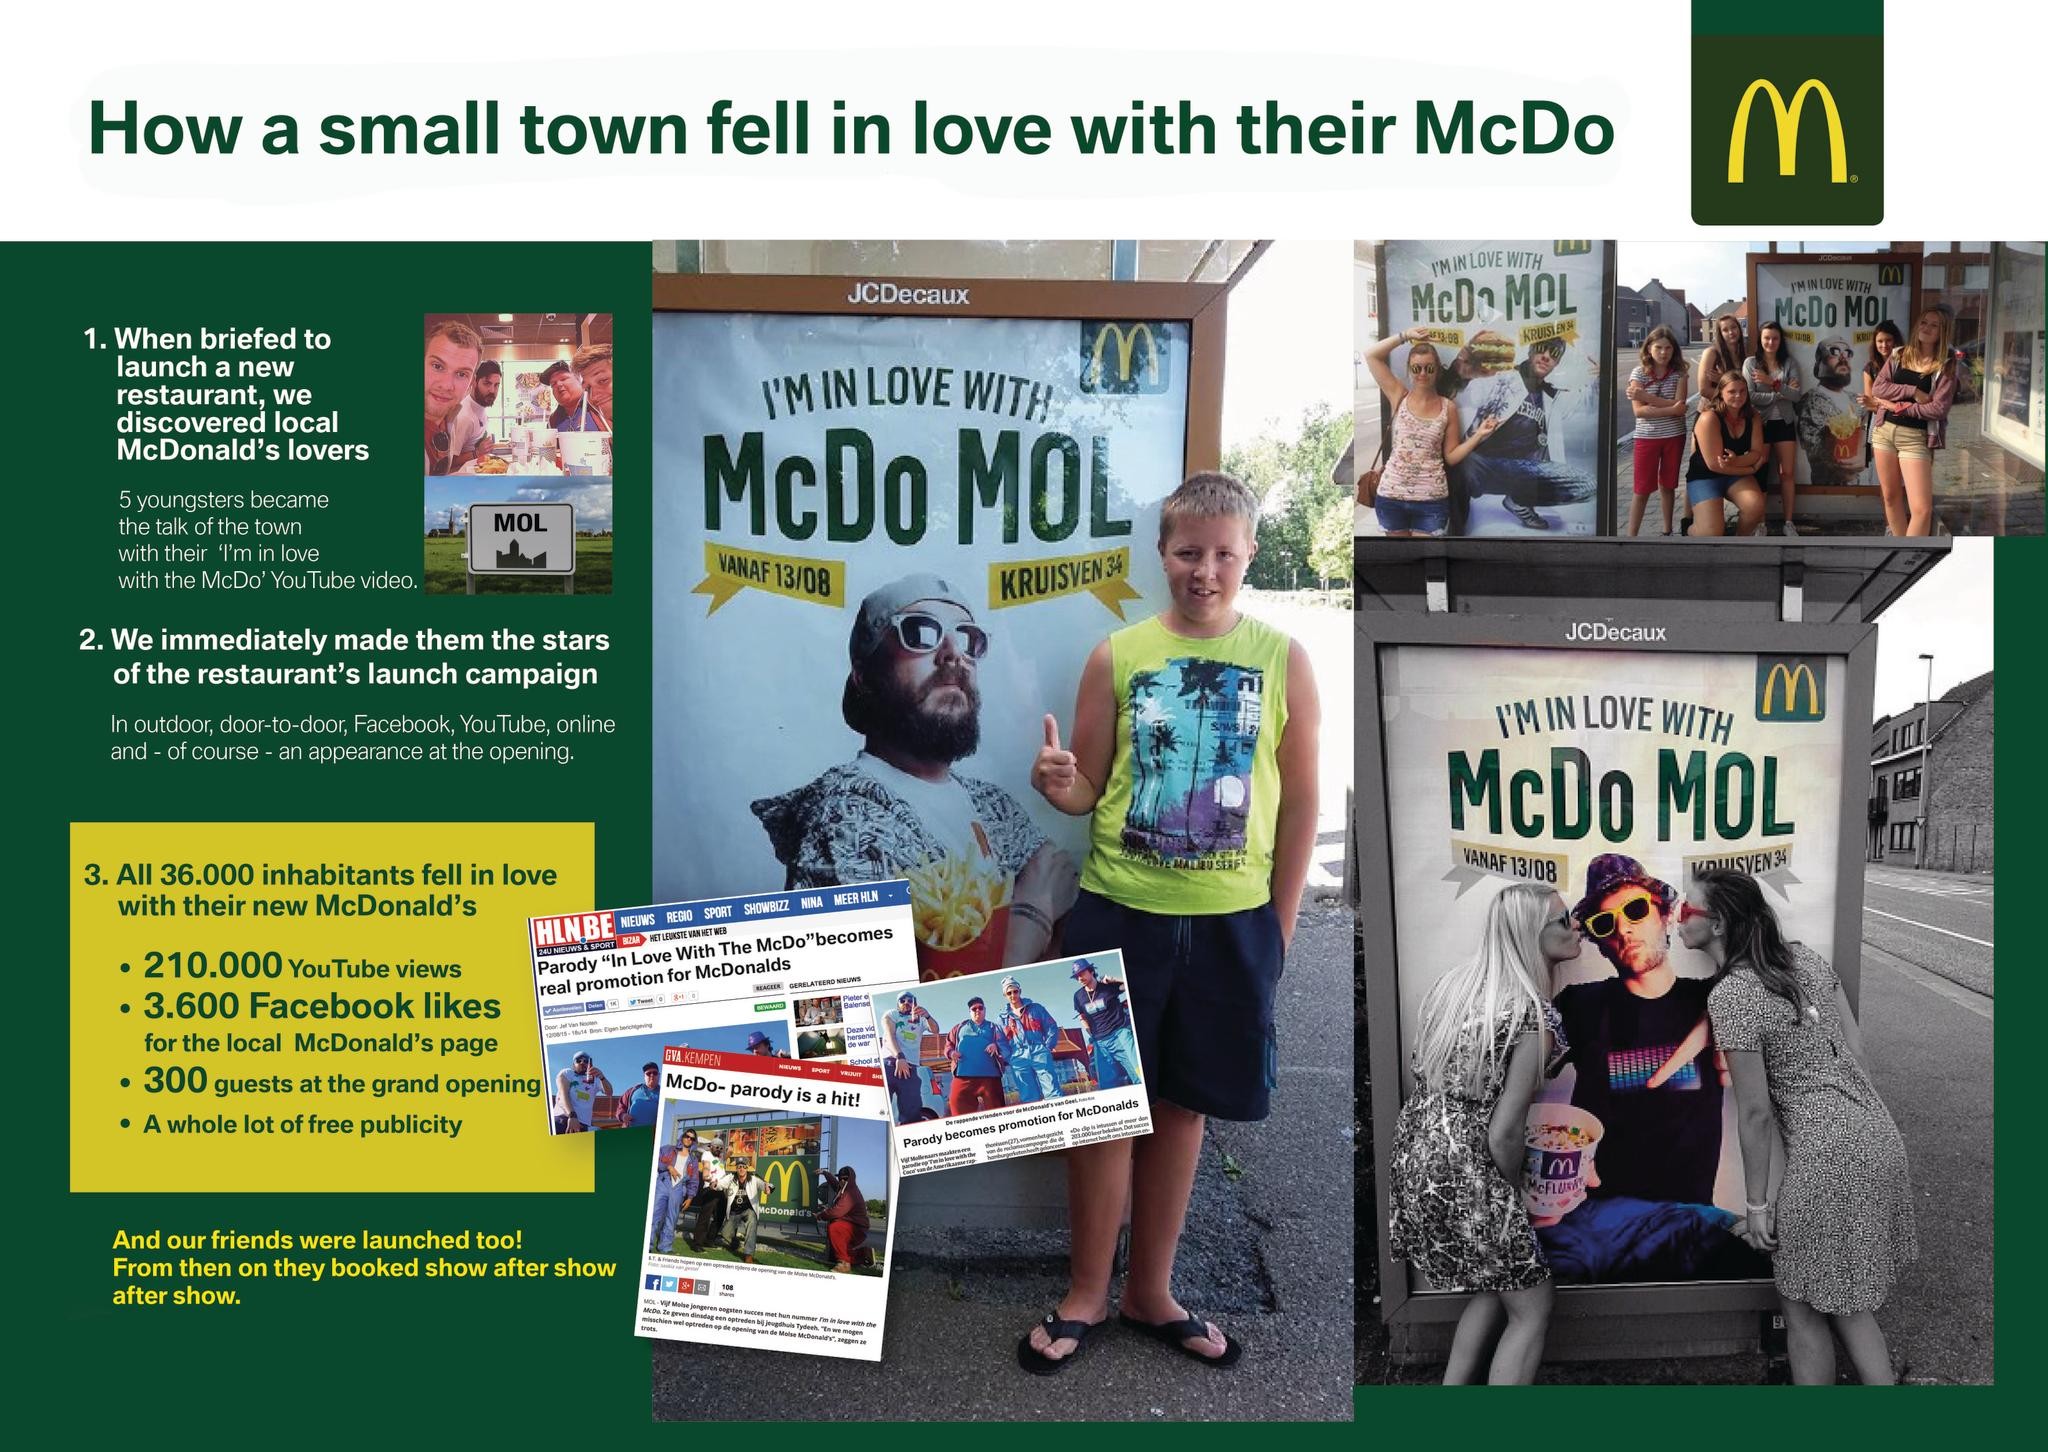 How a small town fell in love with their McDo